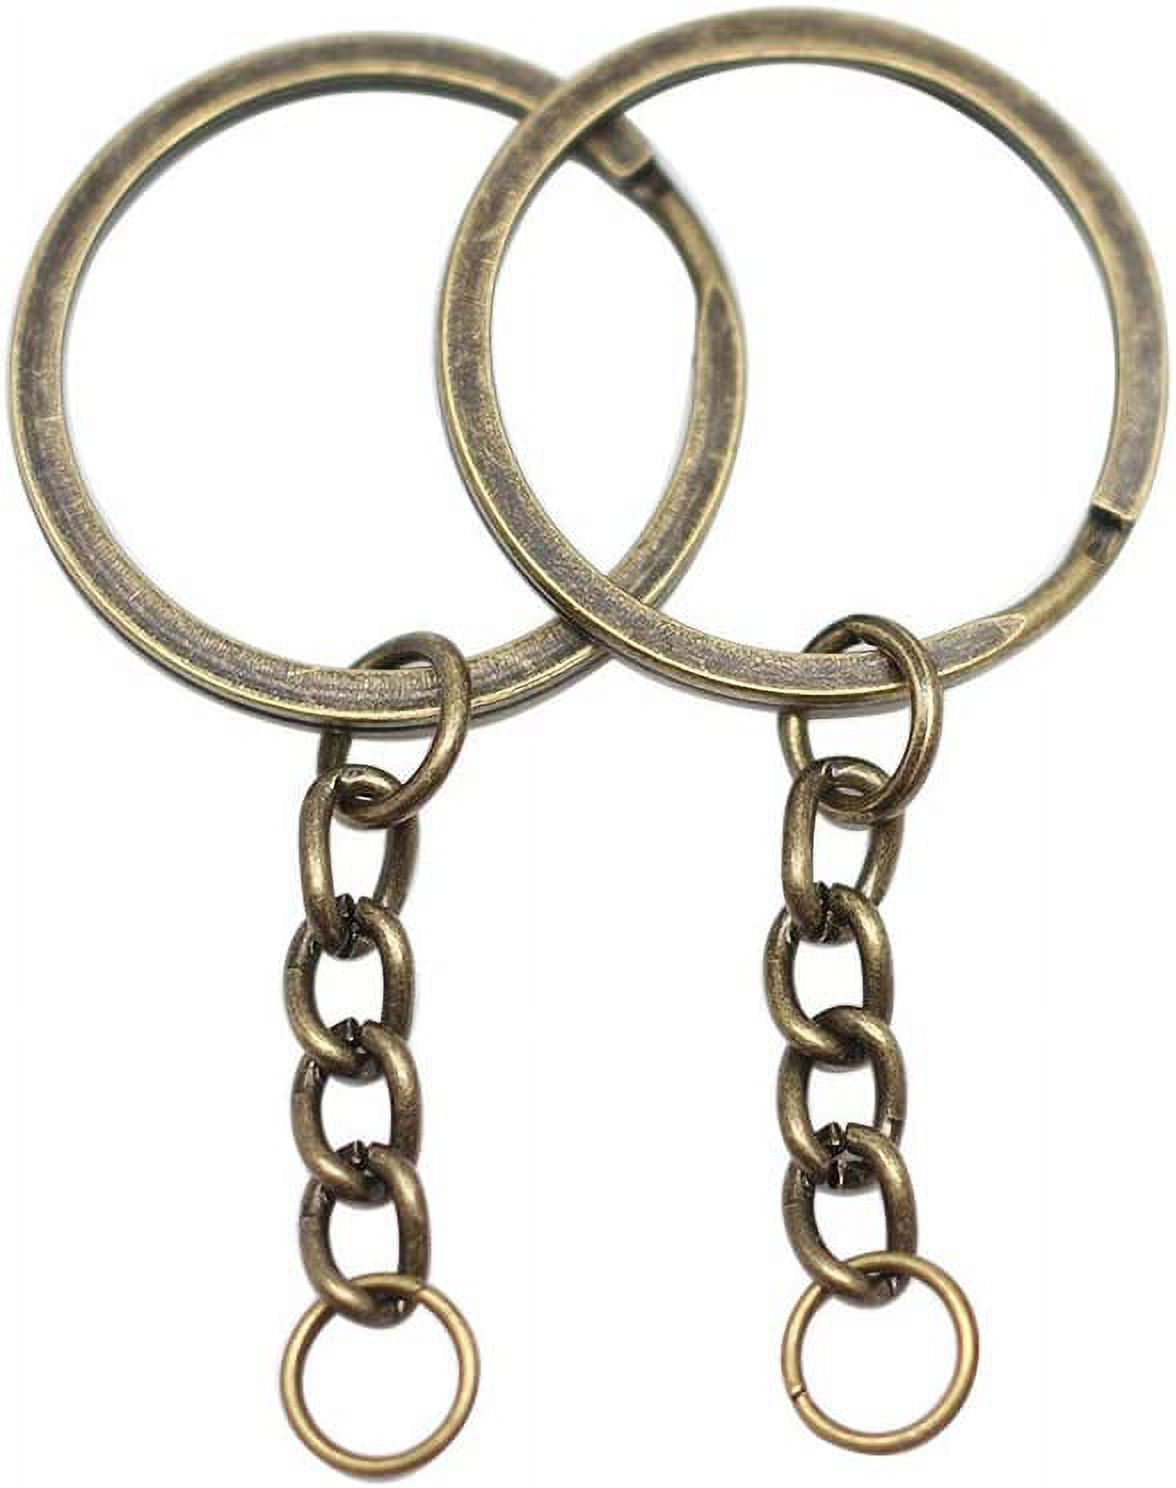 10 pcs/lot Split Key Ring with Chain and Jump Rings 60mm Long Round Split  Keychain Keyrings Jewelry Making Bulk 3 Sizes(Antique Bronze